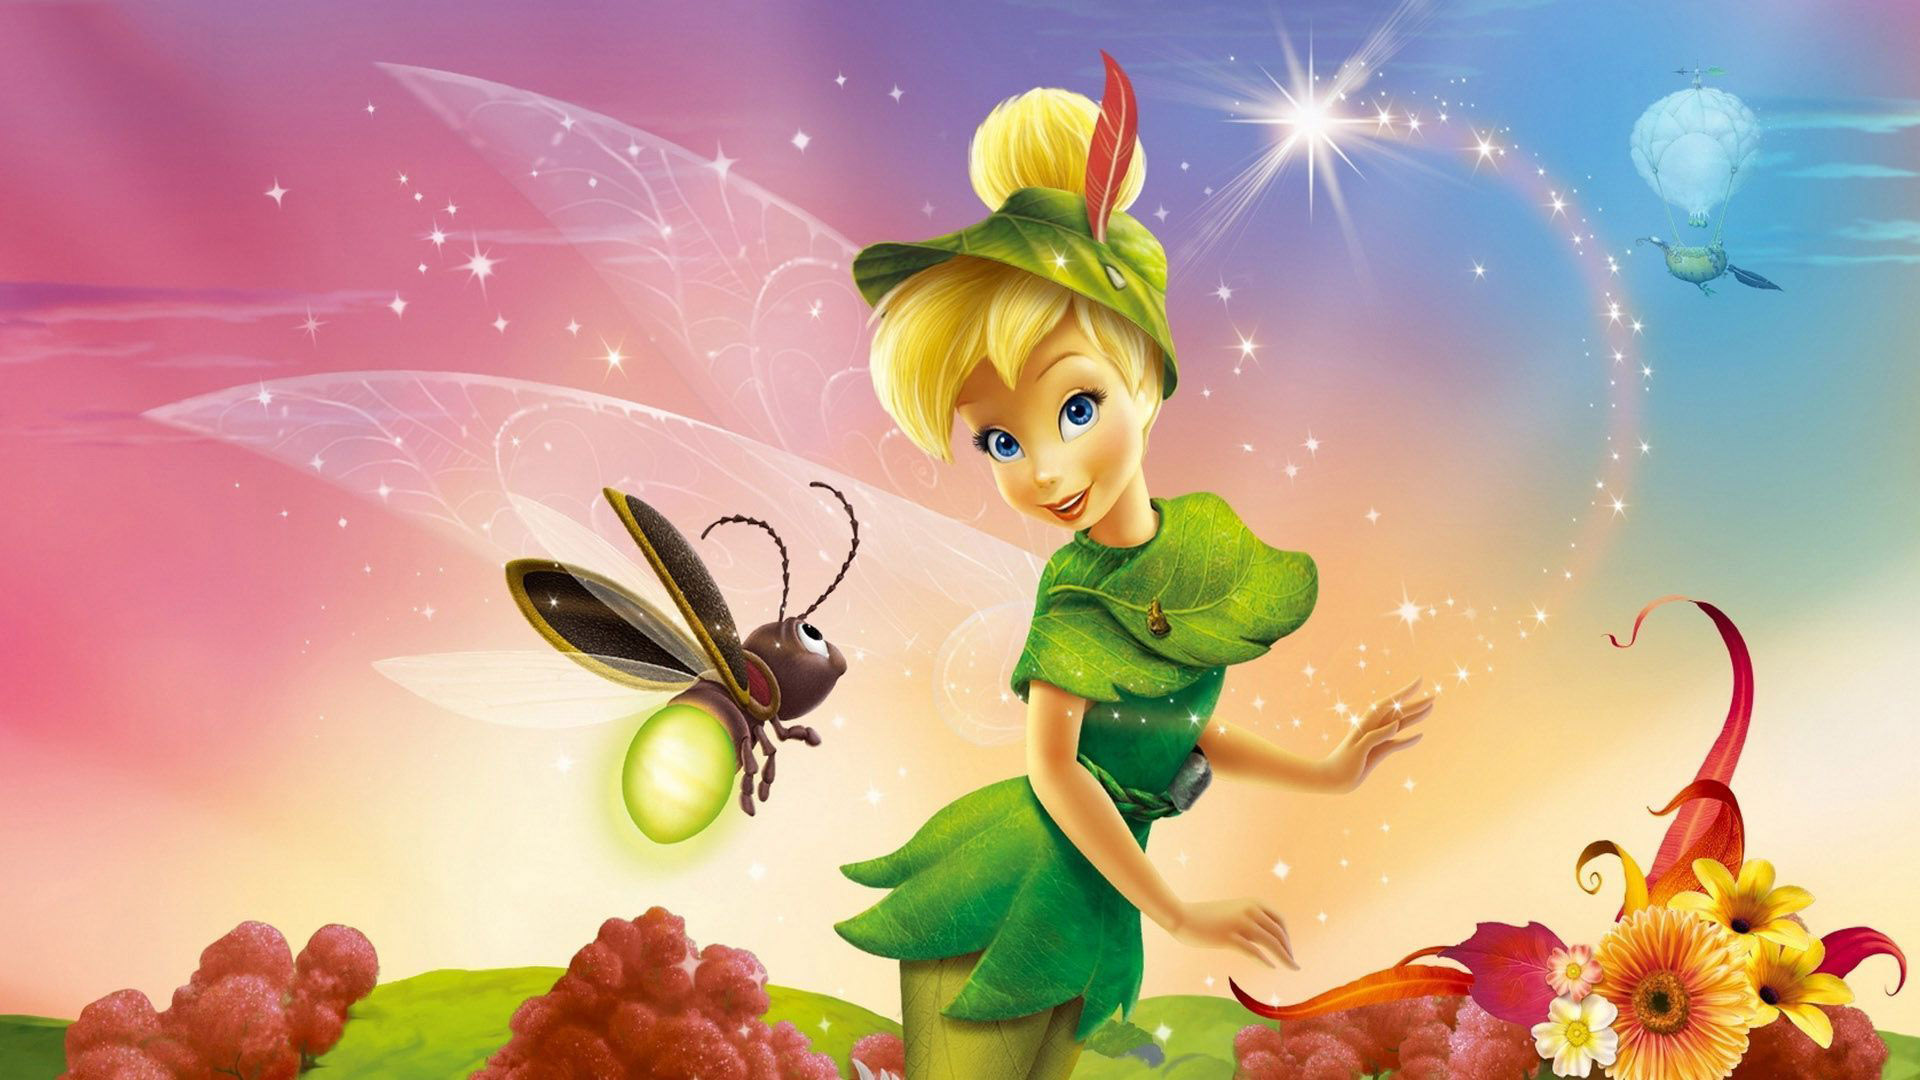 Tinkerbell Phone Wallpaper By Uzueta Pictures To Pin